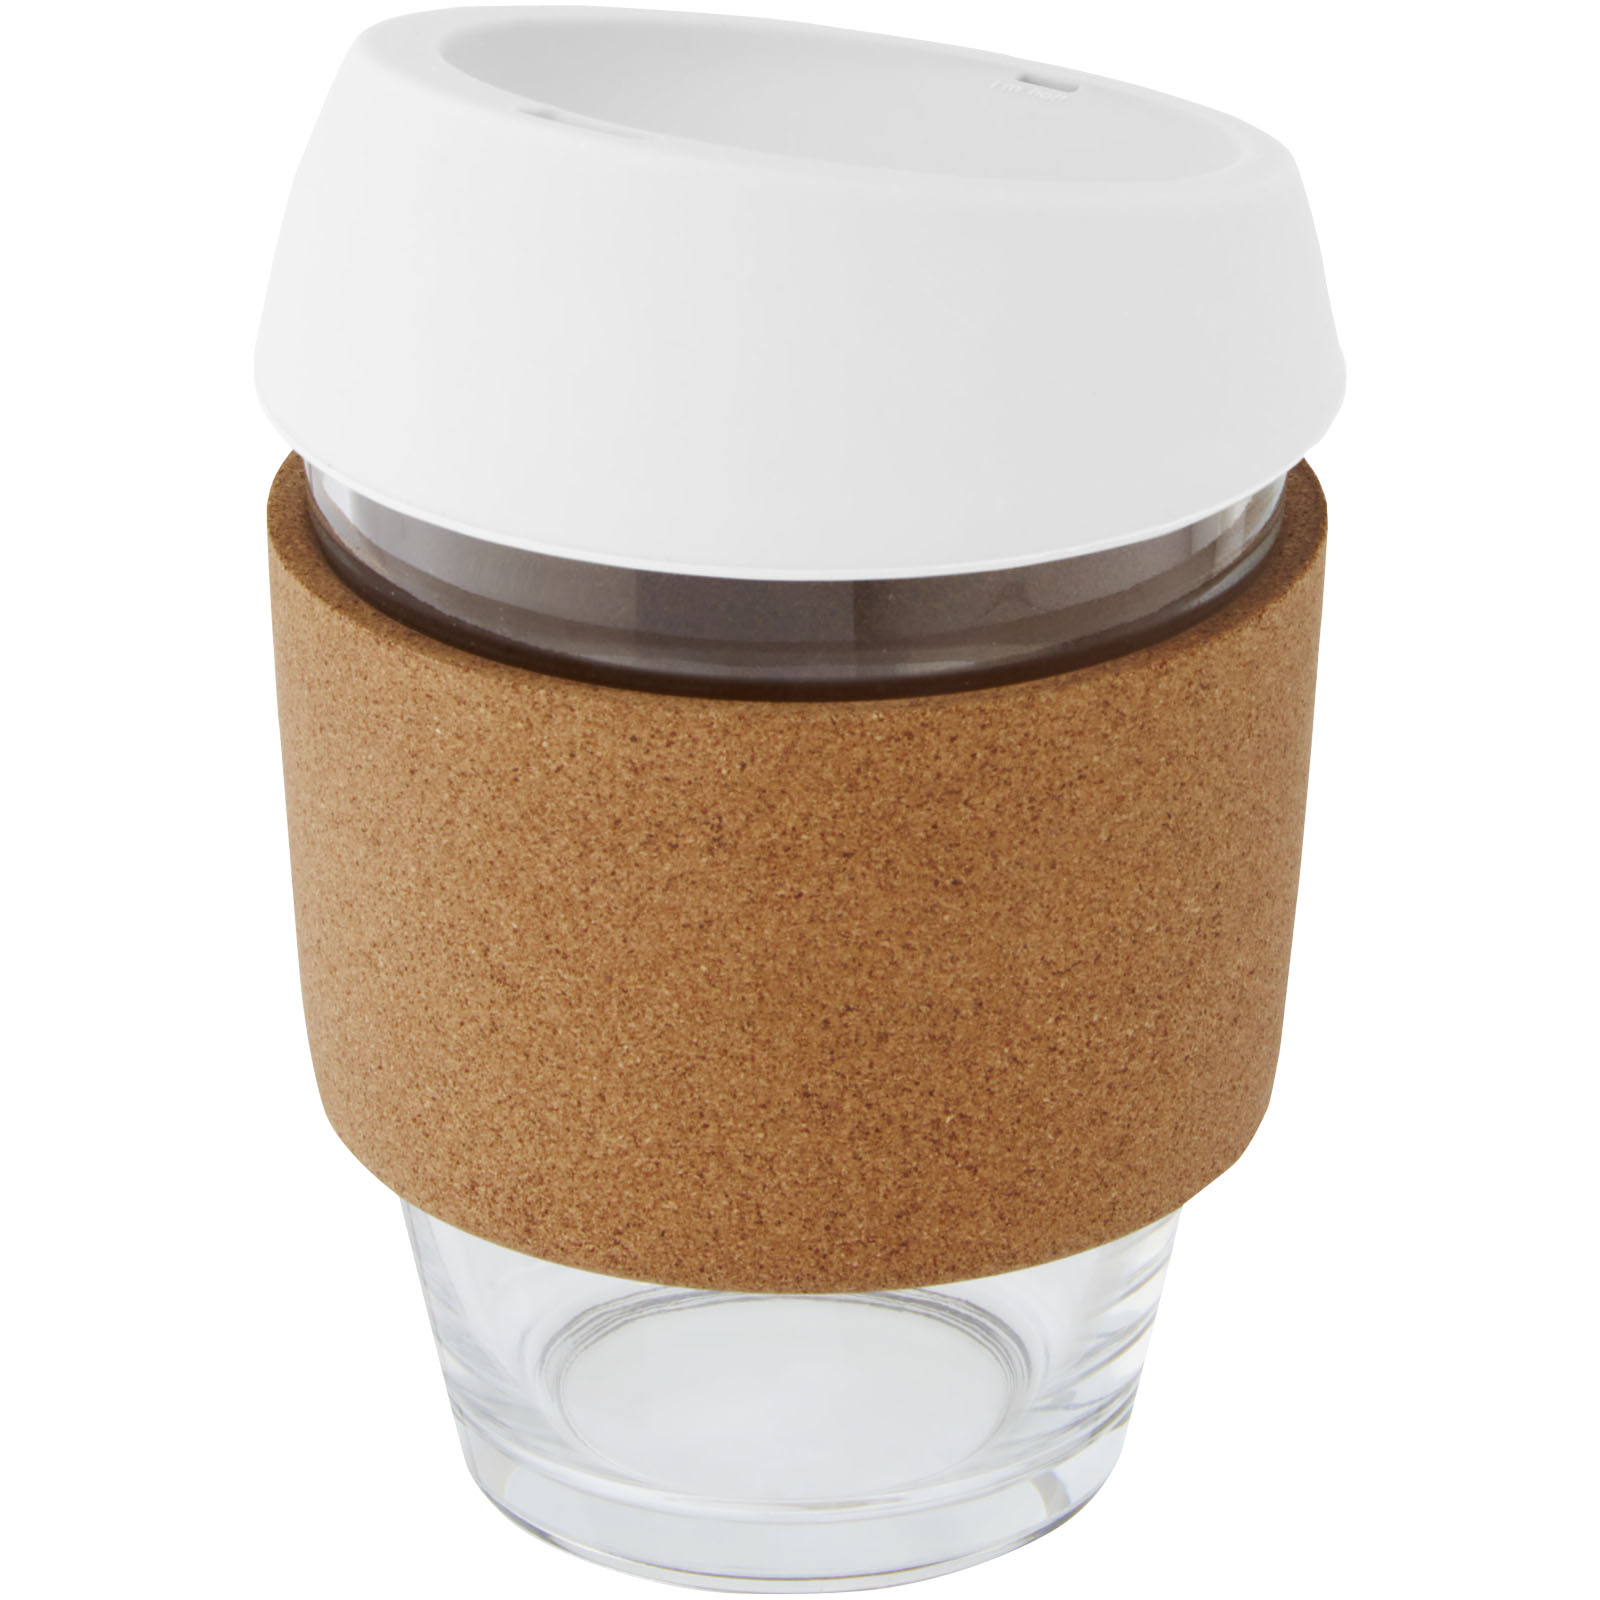 Advertising Travel mugs - Lidan 360 ml borosilicate glass tumbler with cork grip and silicone lid - 3